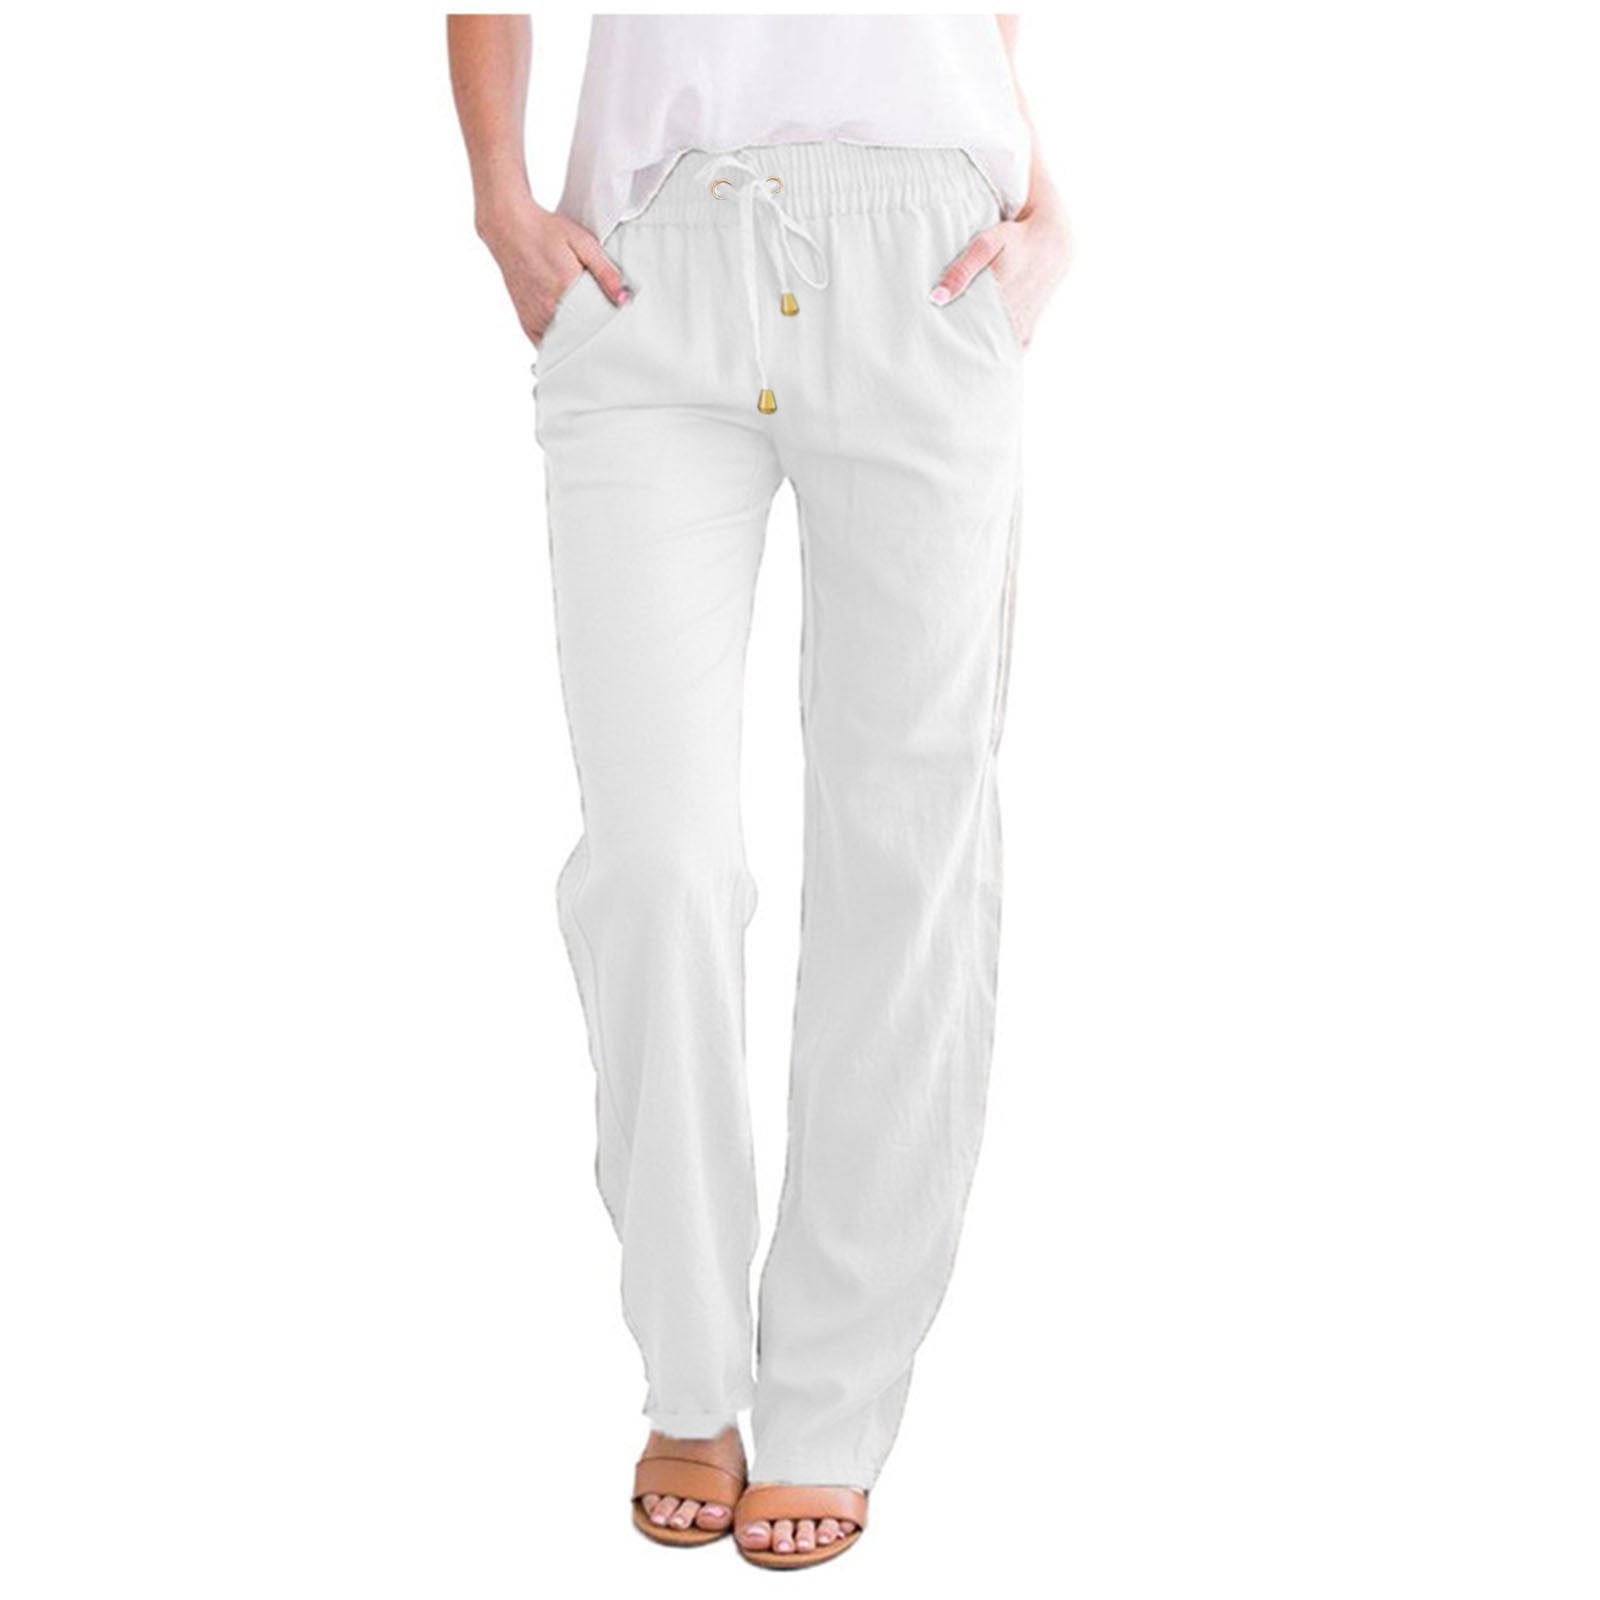 Buy LEE TEX Women Regular Fit Cotton Blend Trousers (L, White) at Amazon.in